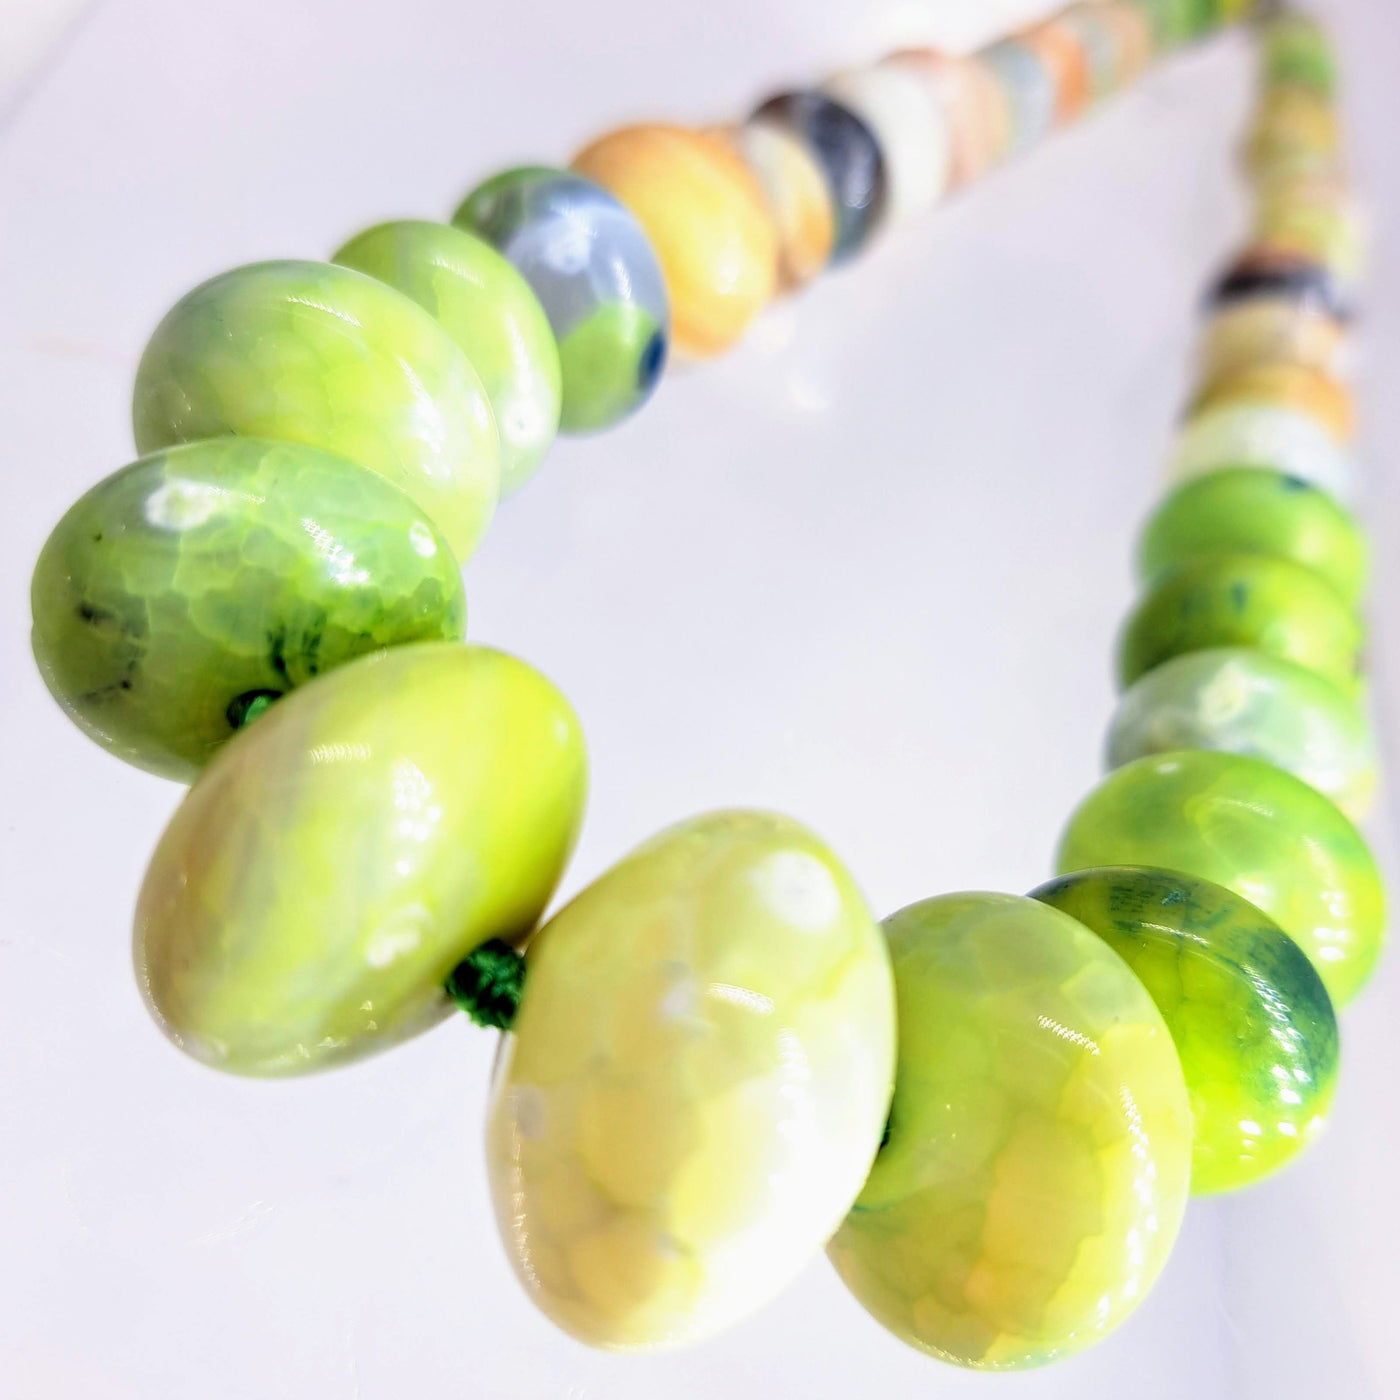 "Edamame Salad" 16" to 18" Necklace - Banded Agate, Sterling